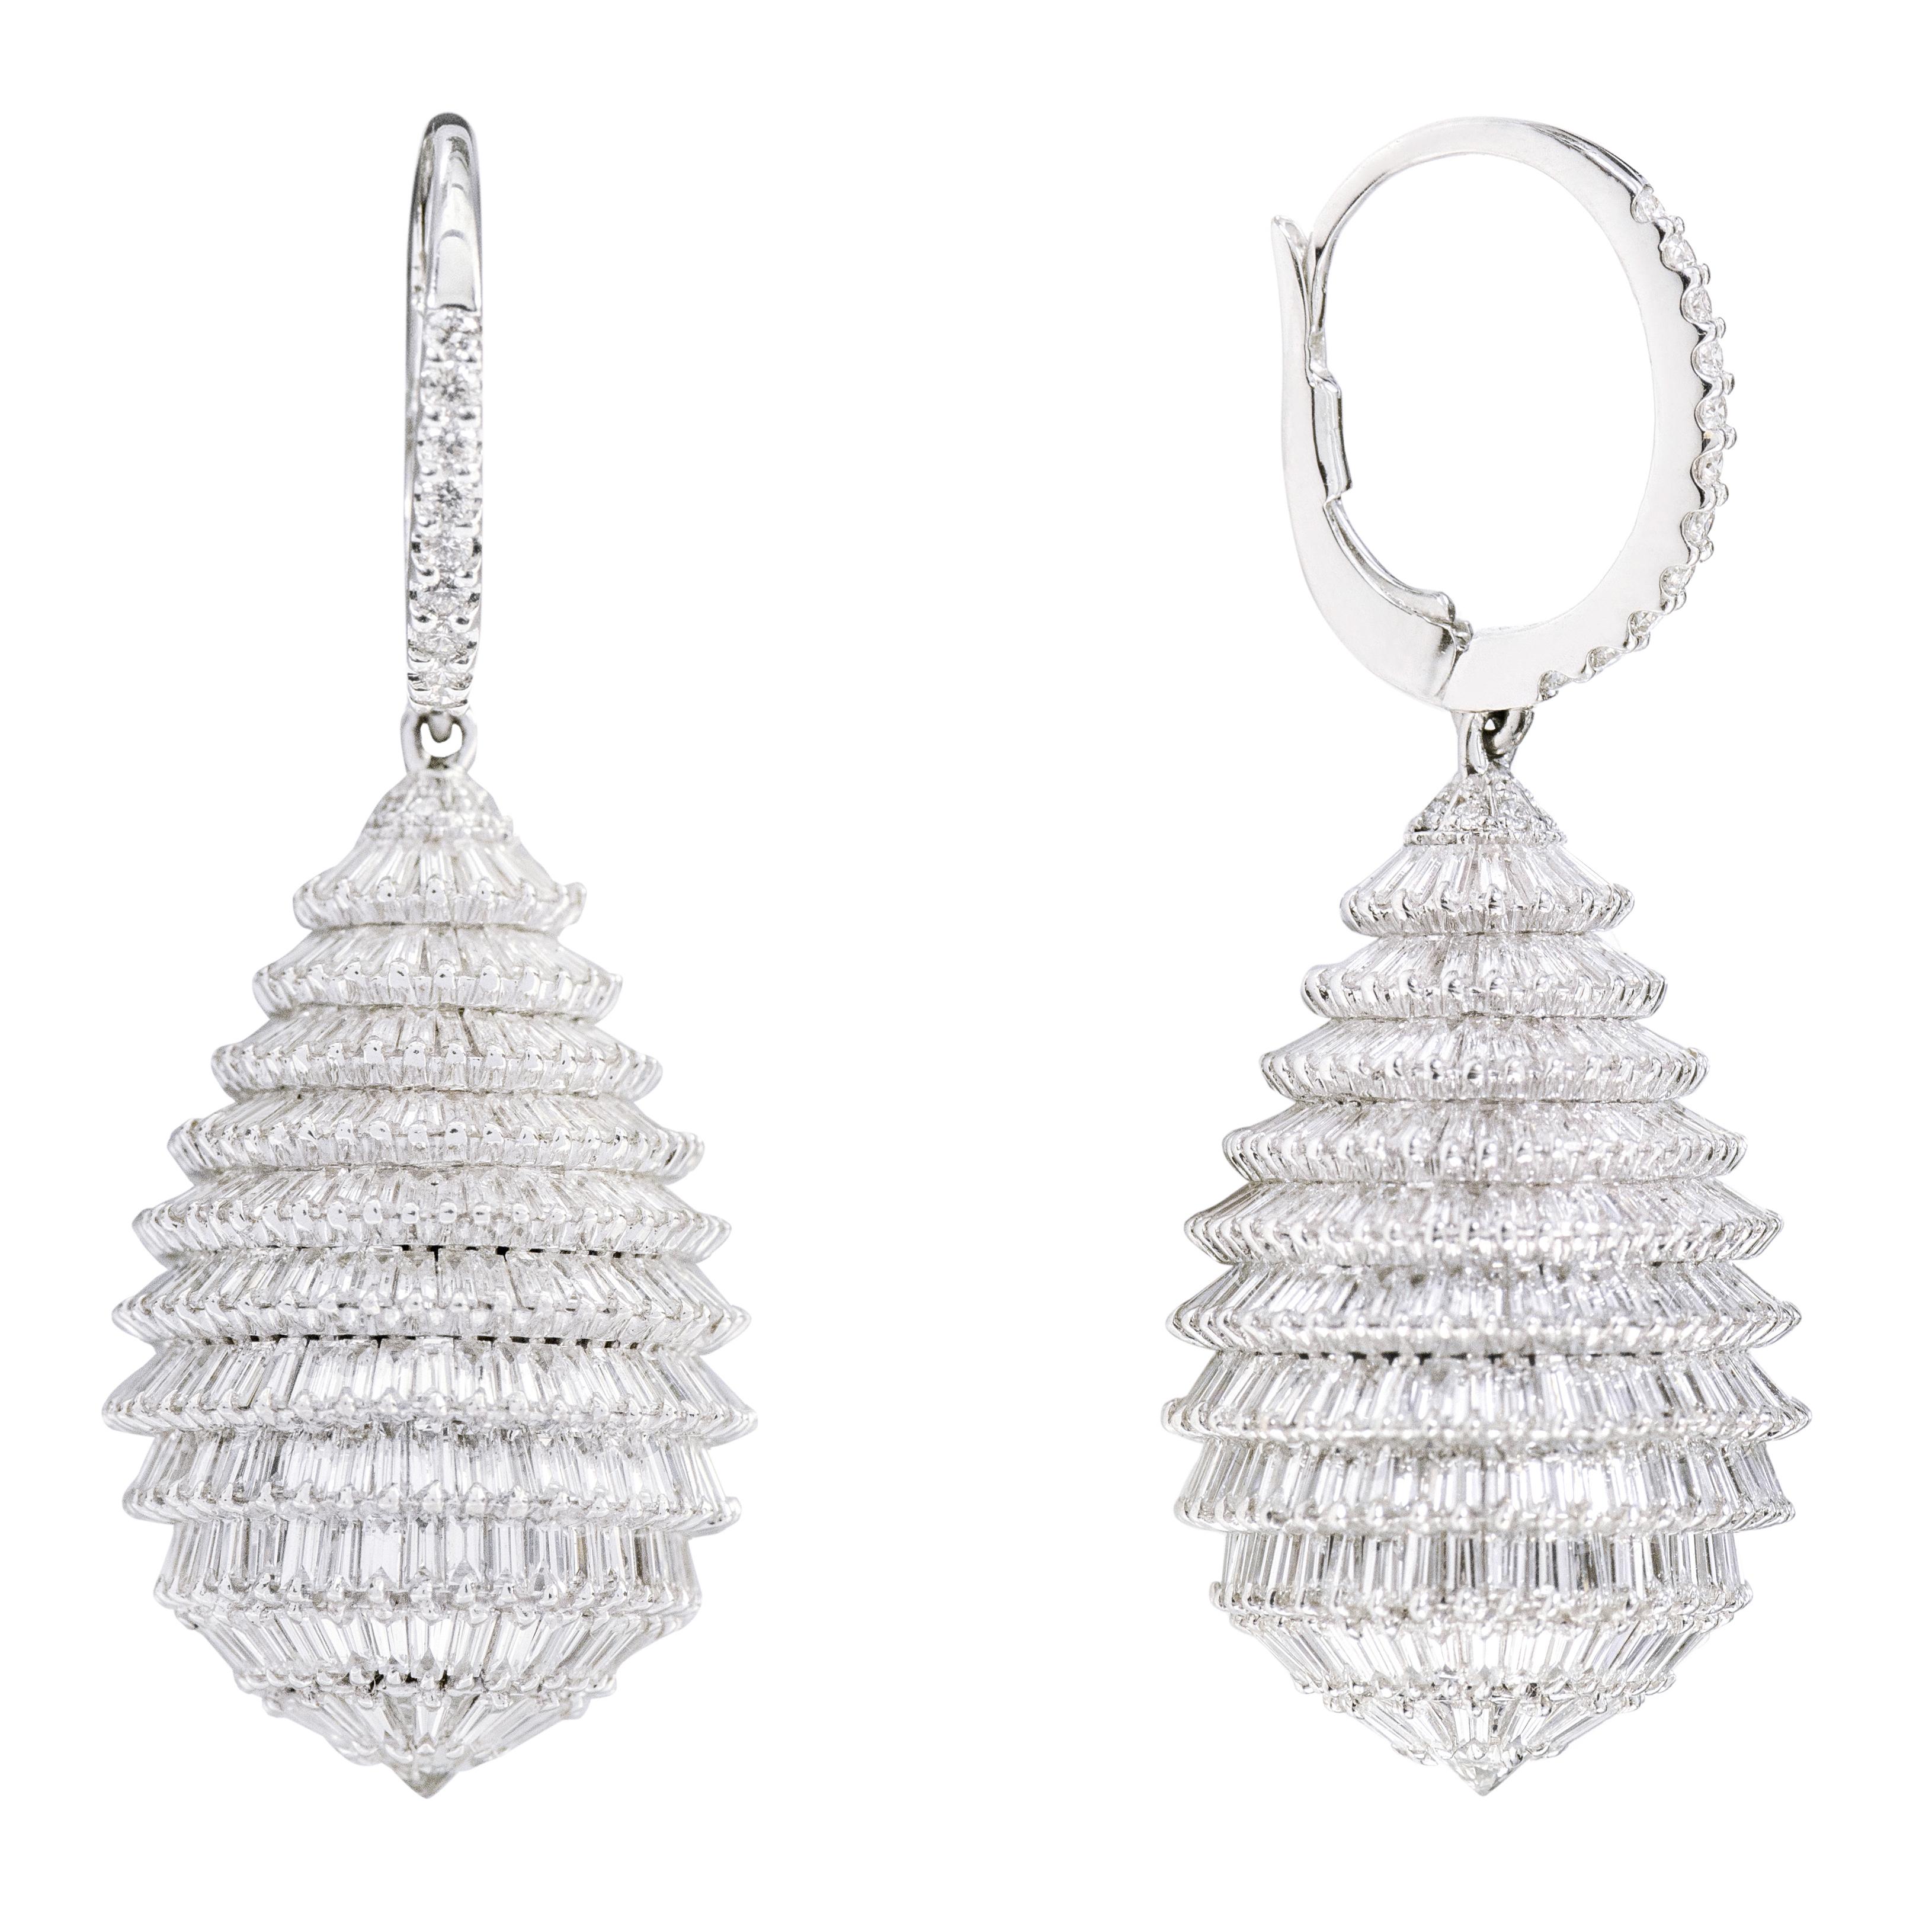 18 Karat White Gold 7.41 Carat Baguette-Cut Diamond Drop Cocktail Earrings

This is a transformative and an articulate visionary diamond drop earring. The earring design is inspired from the in-famous Fraser fir tree. The tree's needles/pines are